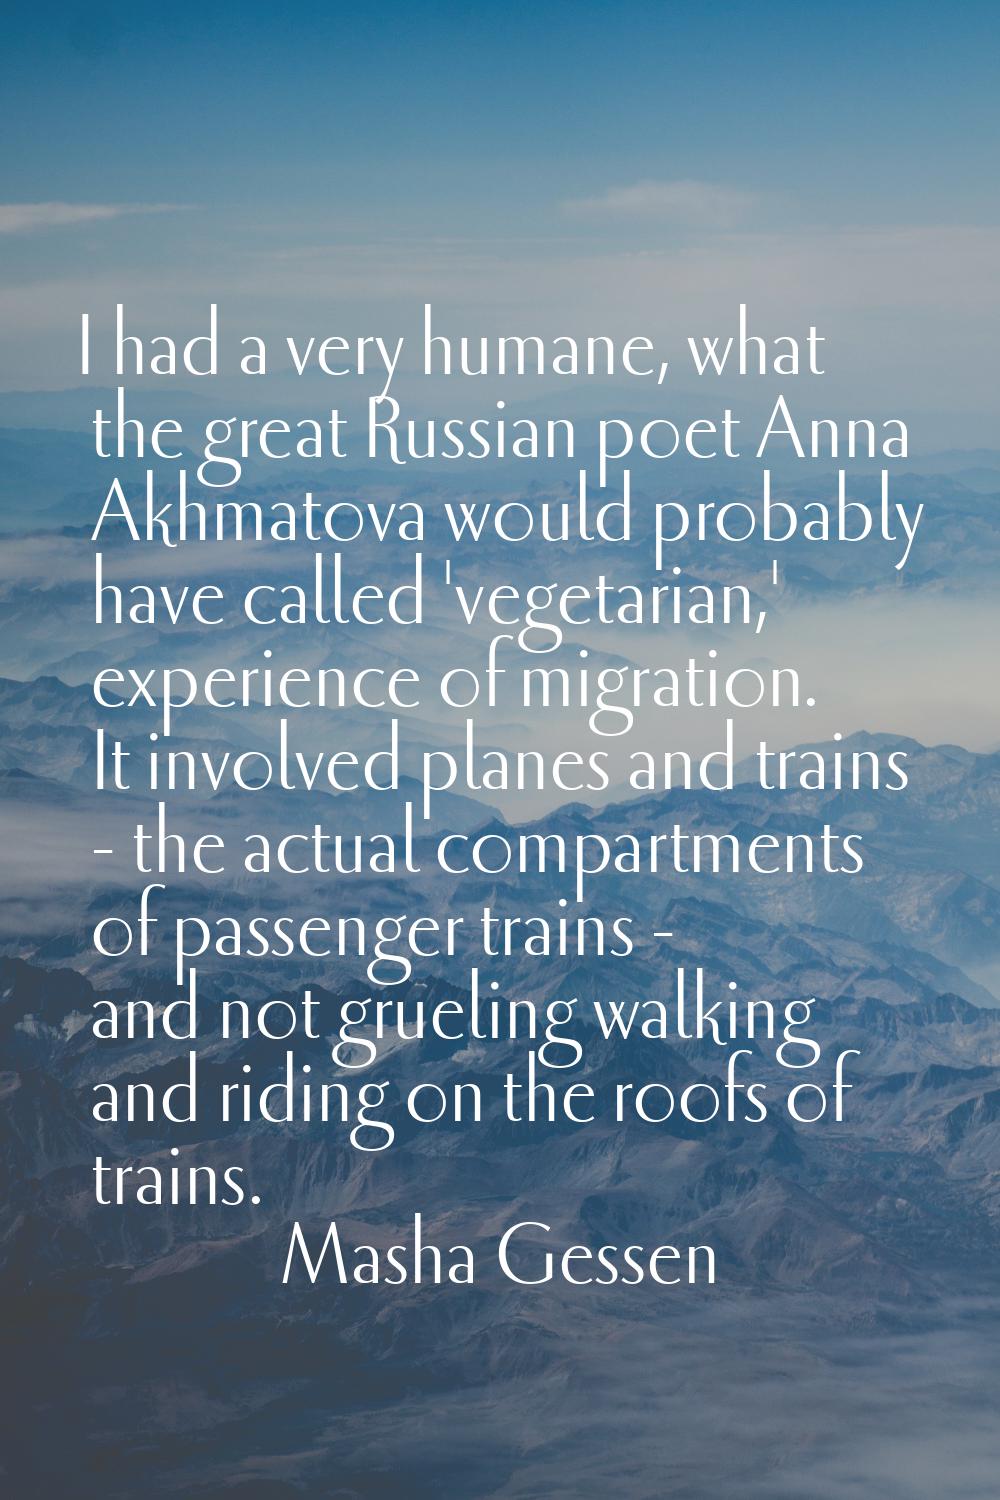 I had a very humane, what the great Russian poet Anna Akhmatova would probably have called 'vegetar